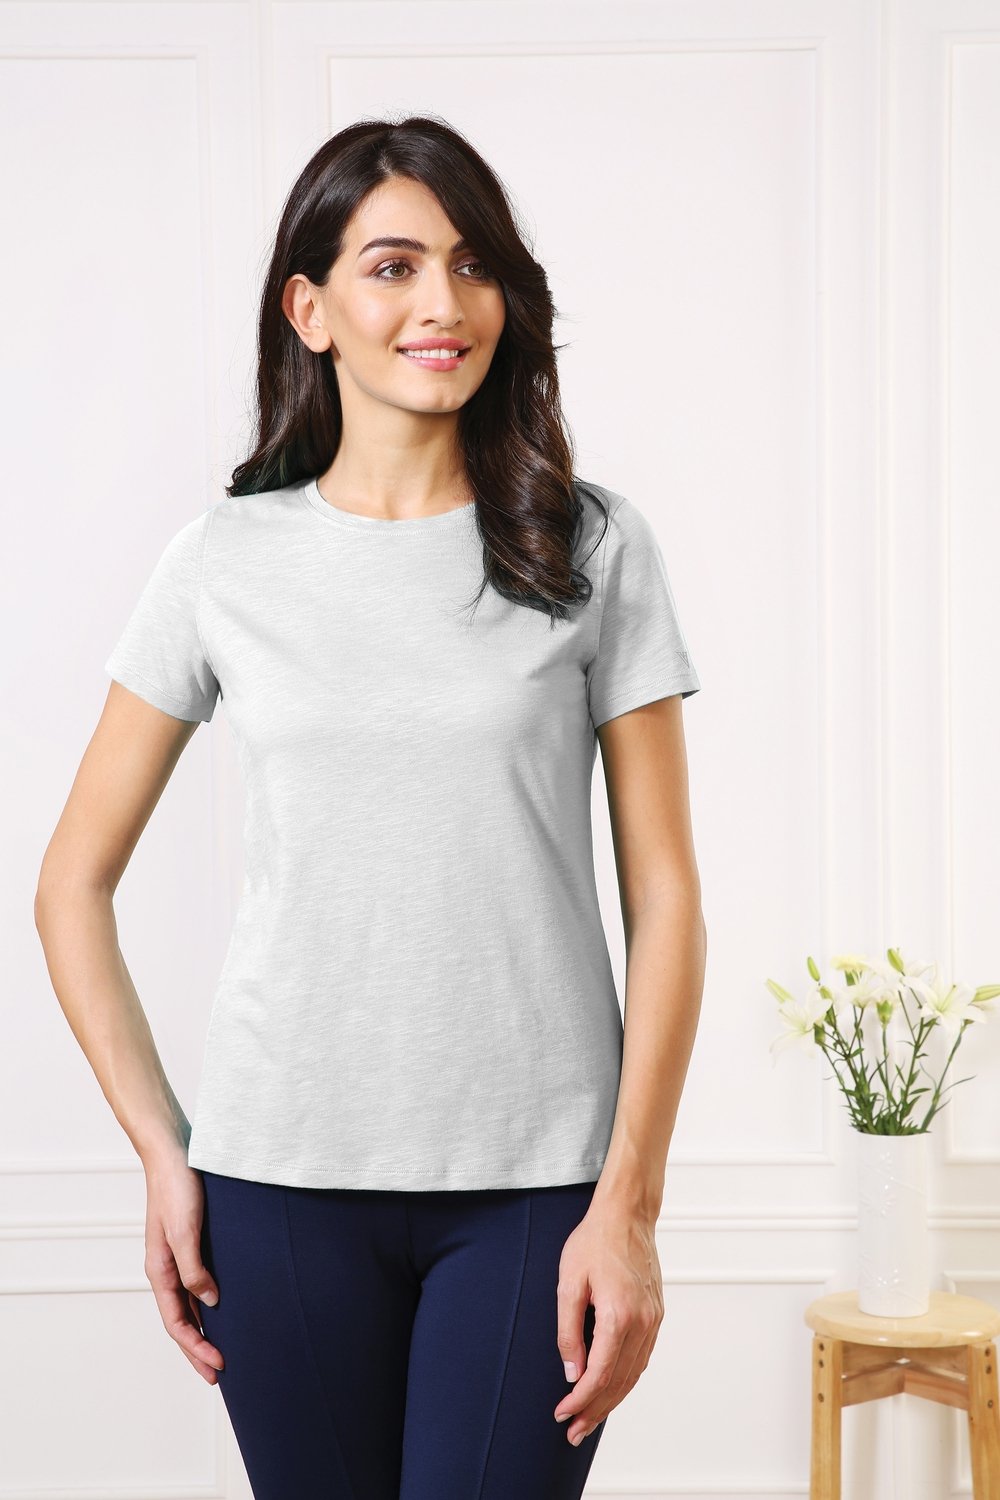 Classic Cotton Every day Wear Grey t-shirt tops for Women - Stilento